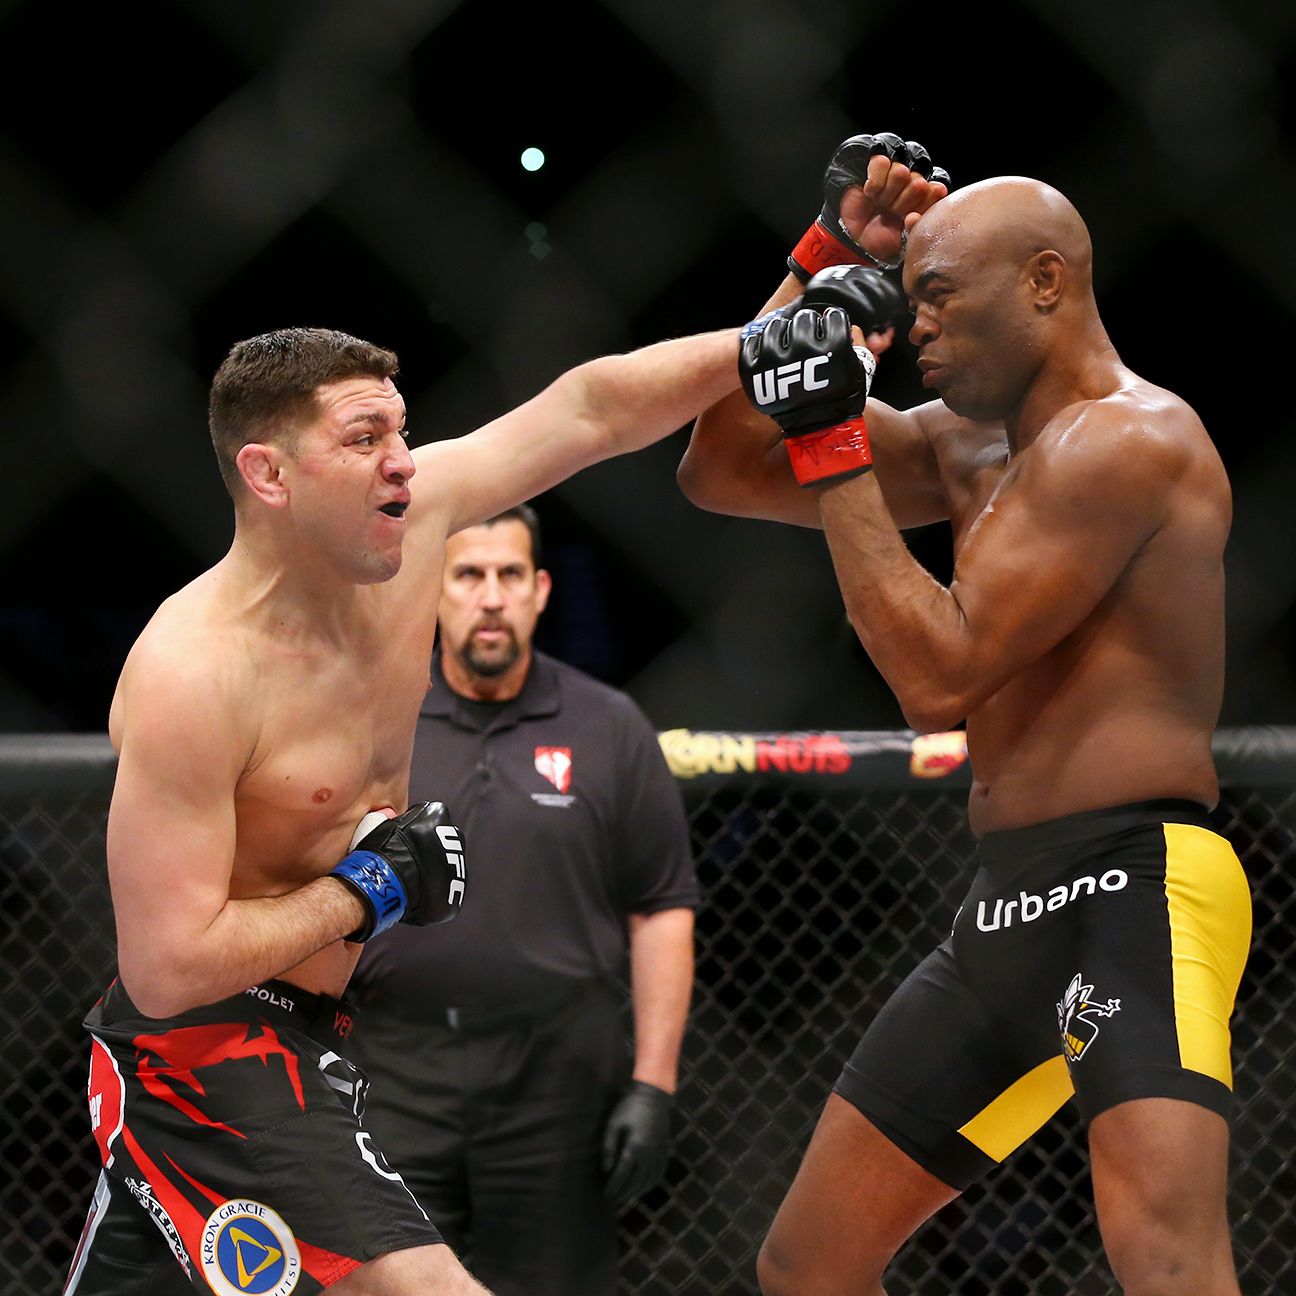 Anderson Silva, Nick Diaz both test positive for drugs1296 x 1296